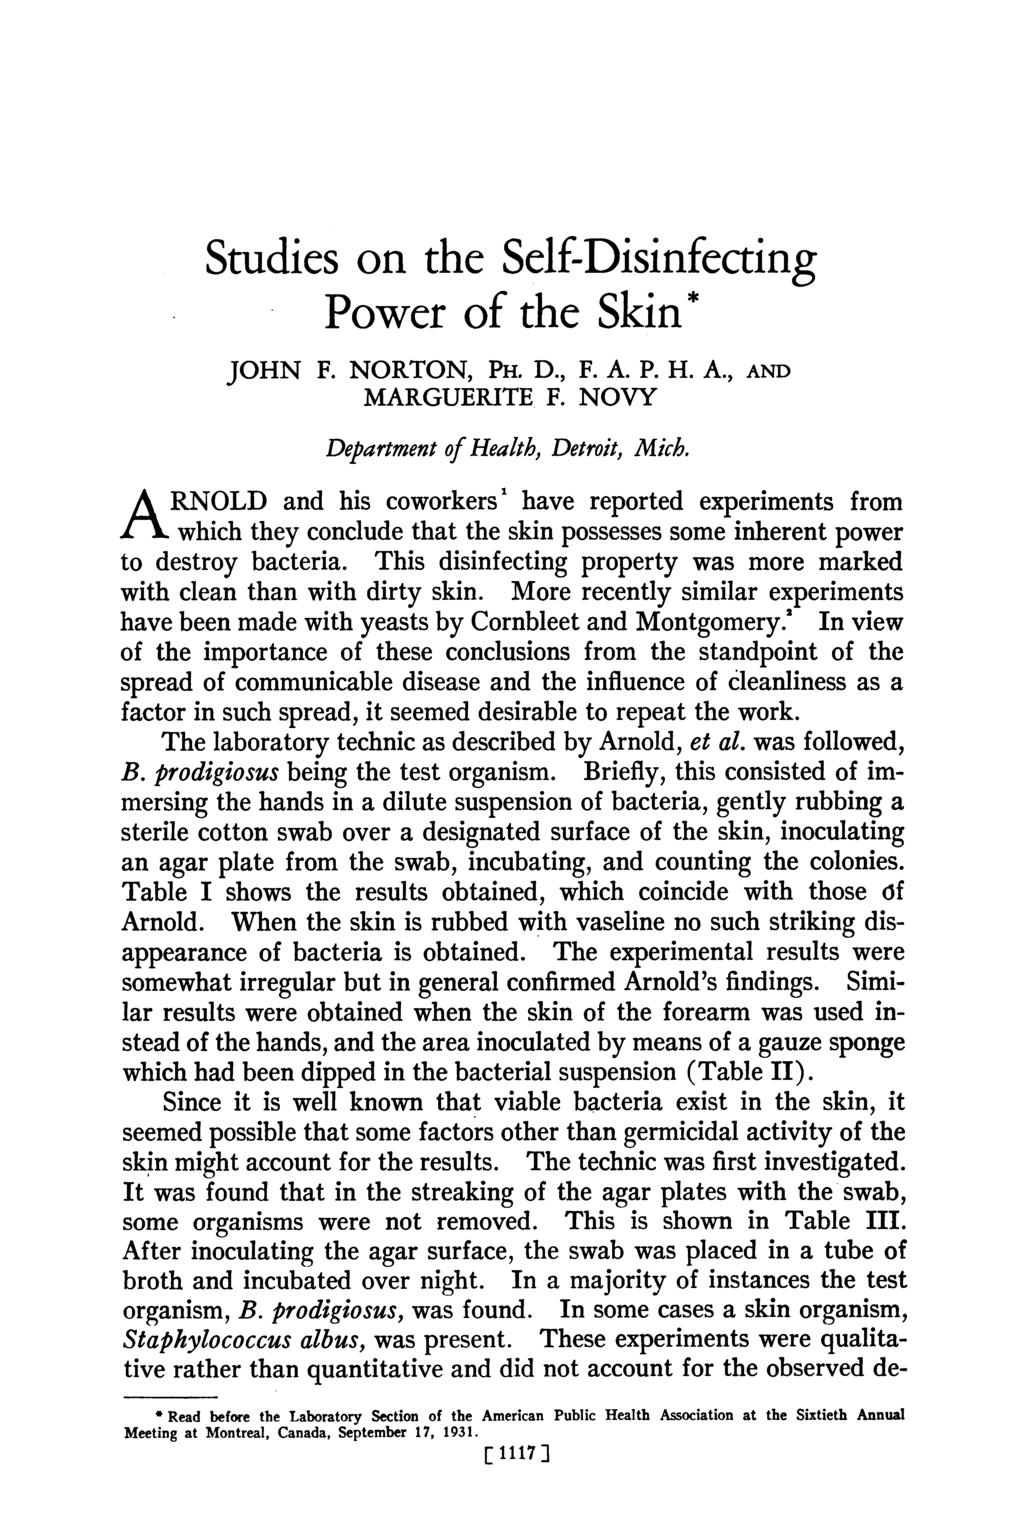 Studies on the Seif-Disinfecting Power of the Skin* JOHN F. NORTON, PH. D., F. A. P. H. A., AND MARGUERITE F. NOVY Department of Health, Detroit, Mich.